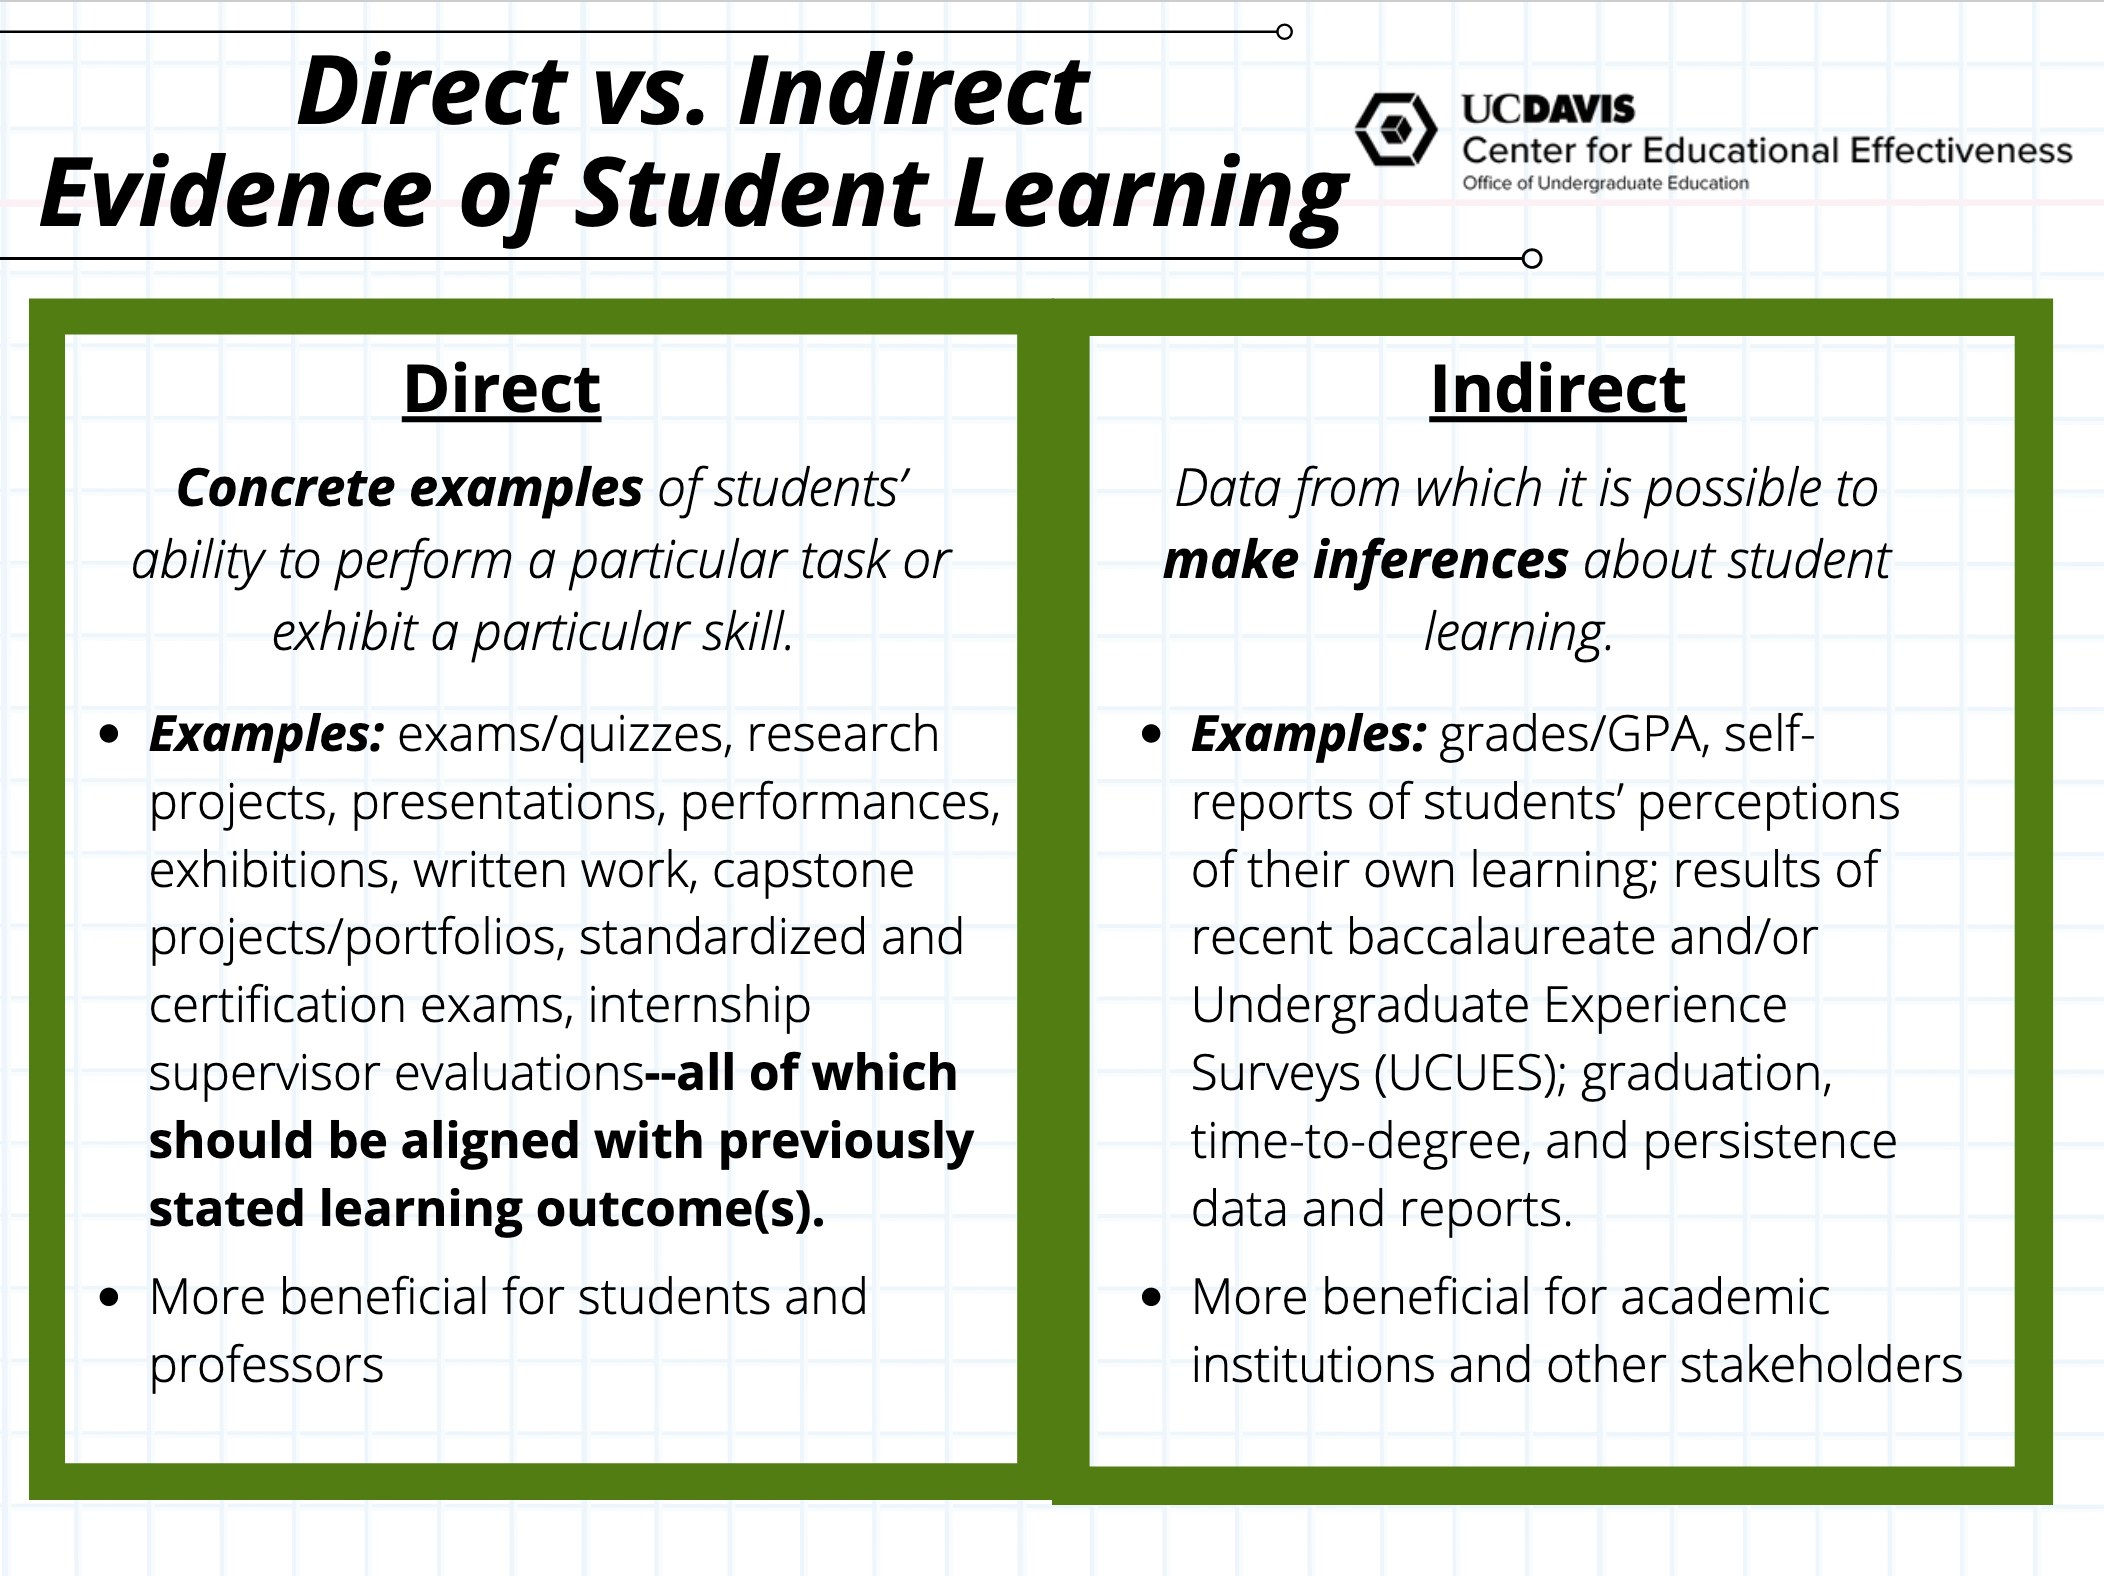 Direct vs Indirect Evidence